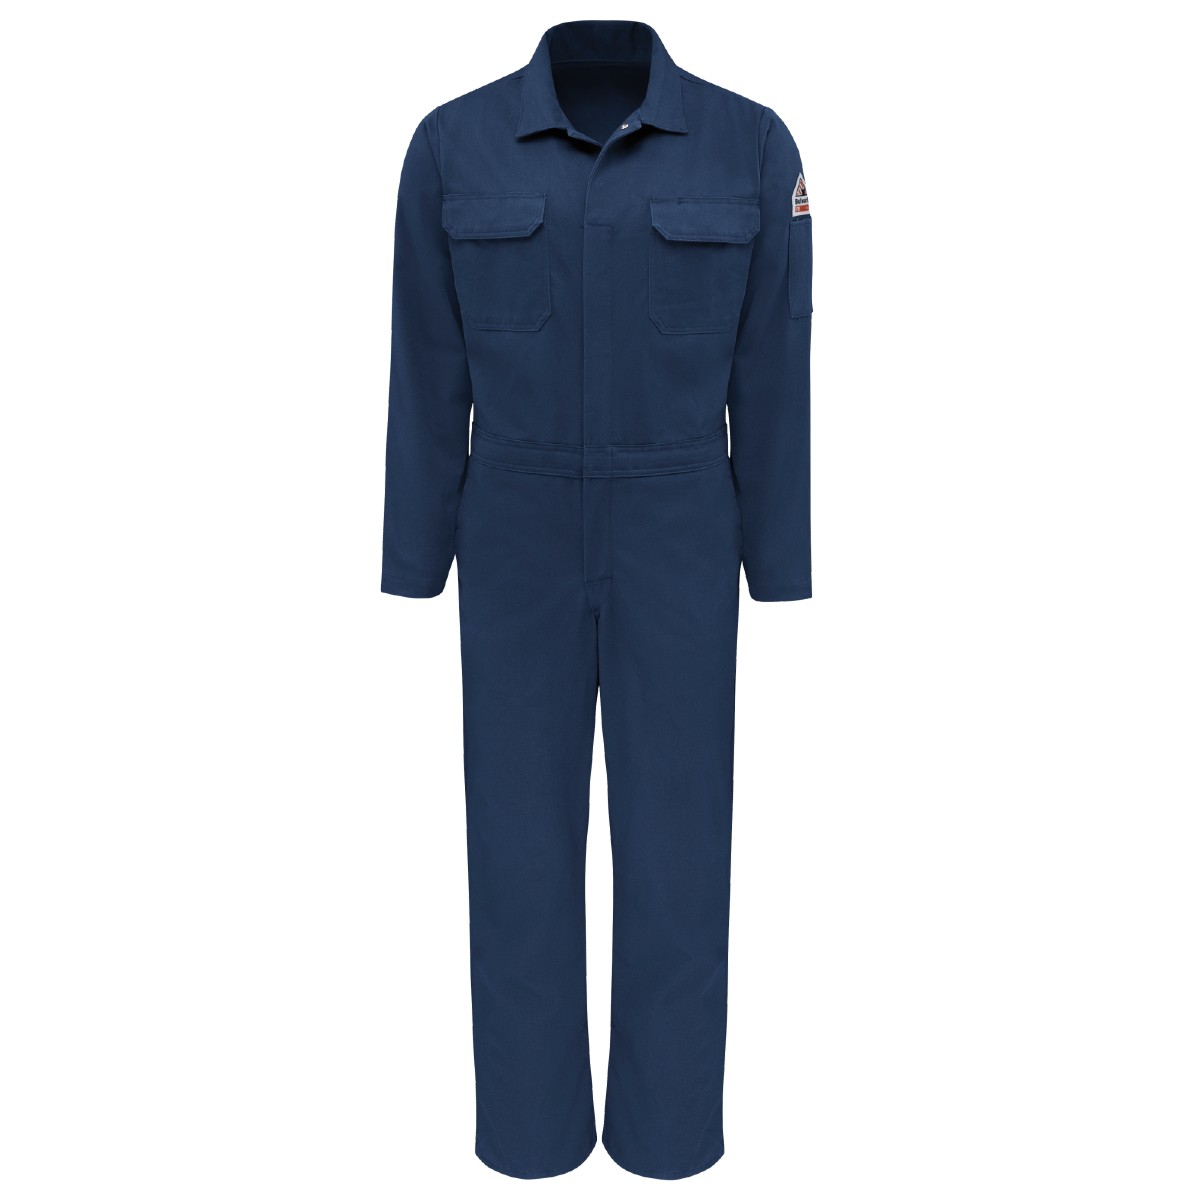 Bulwark Midweight Excel FR Premium Coverall in Navy